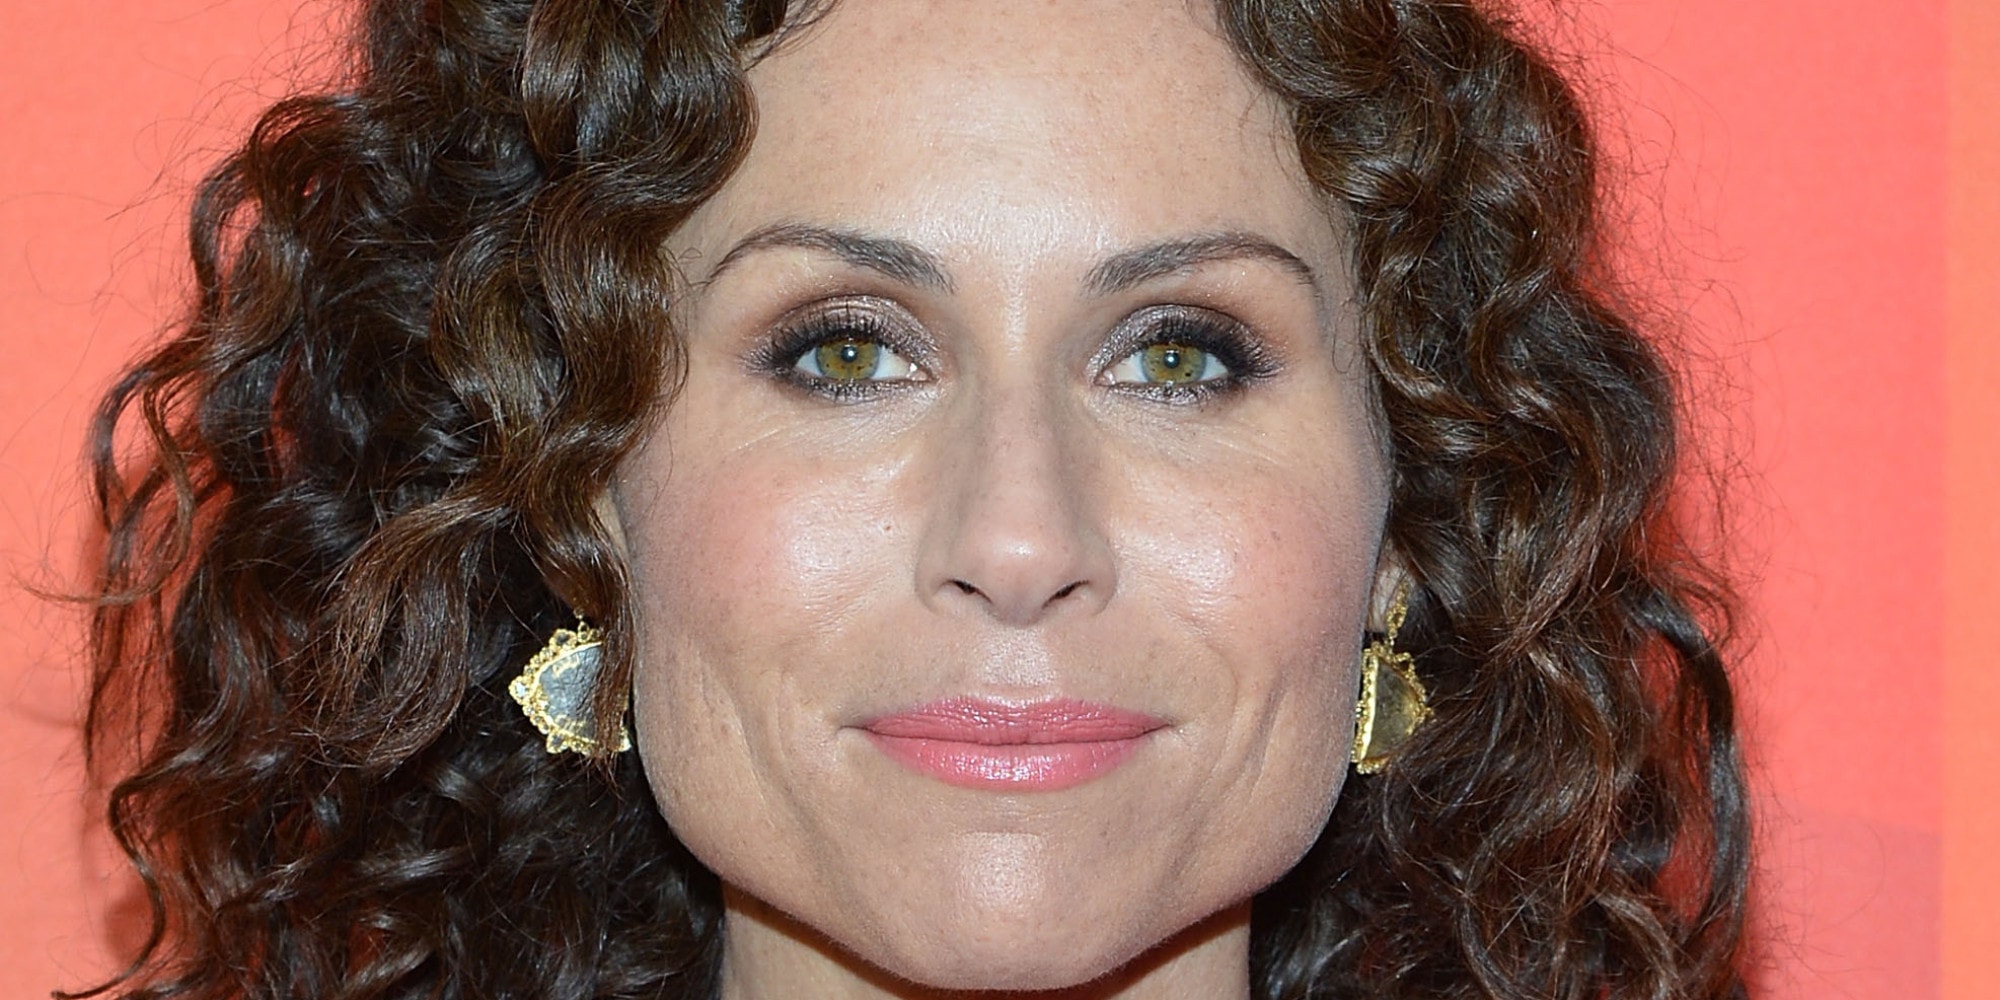 Minnie Driver Wallpapers